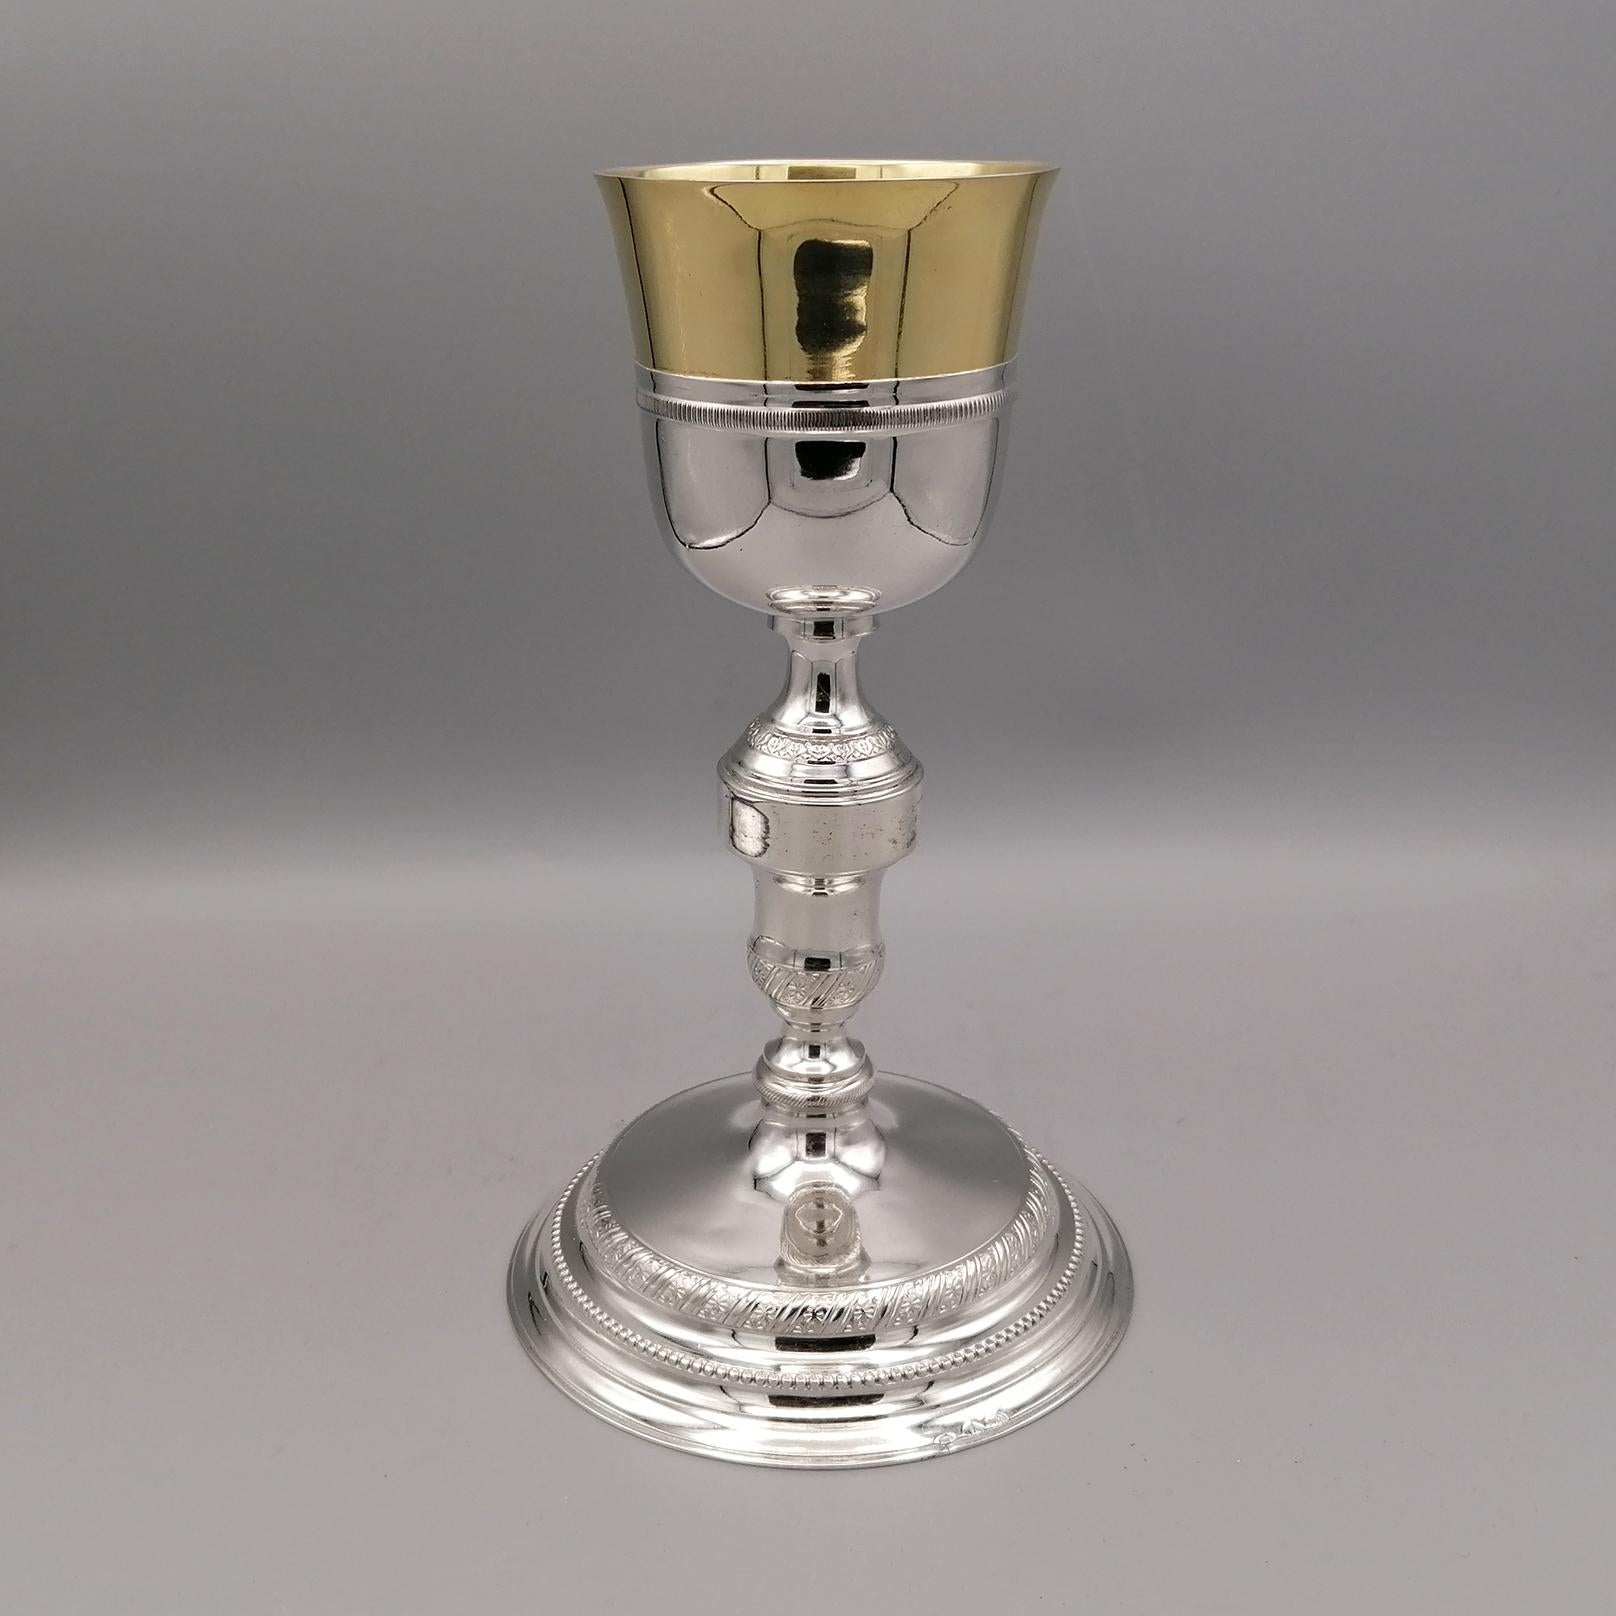 XIX ° Century Italian silver Liturgical Chalice.
The Chalice, smooth and very balanced in its shapes, is in Empire style and is characterized by the classic palmette design on the stem that identifies its style.
Made in Italy in Turin, the chalice